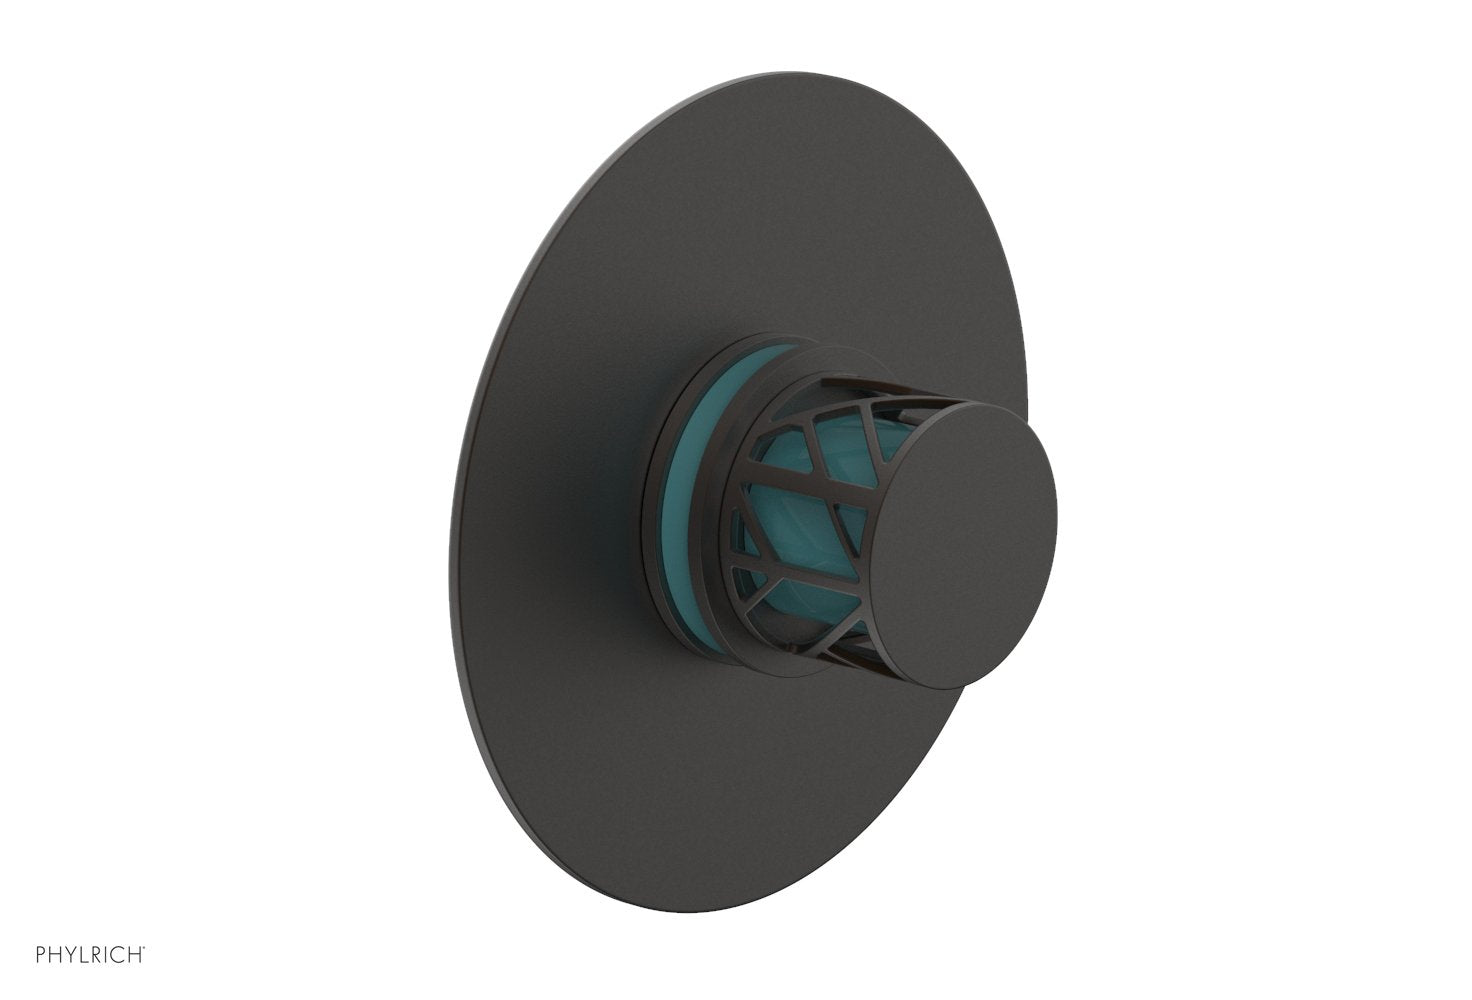 Phylrich JOLIE Thermostatic Shower Trim, Round Handle with "Turquoise" Accents